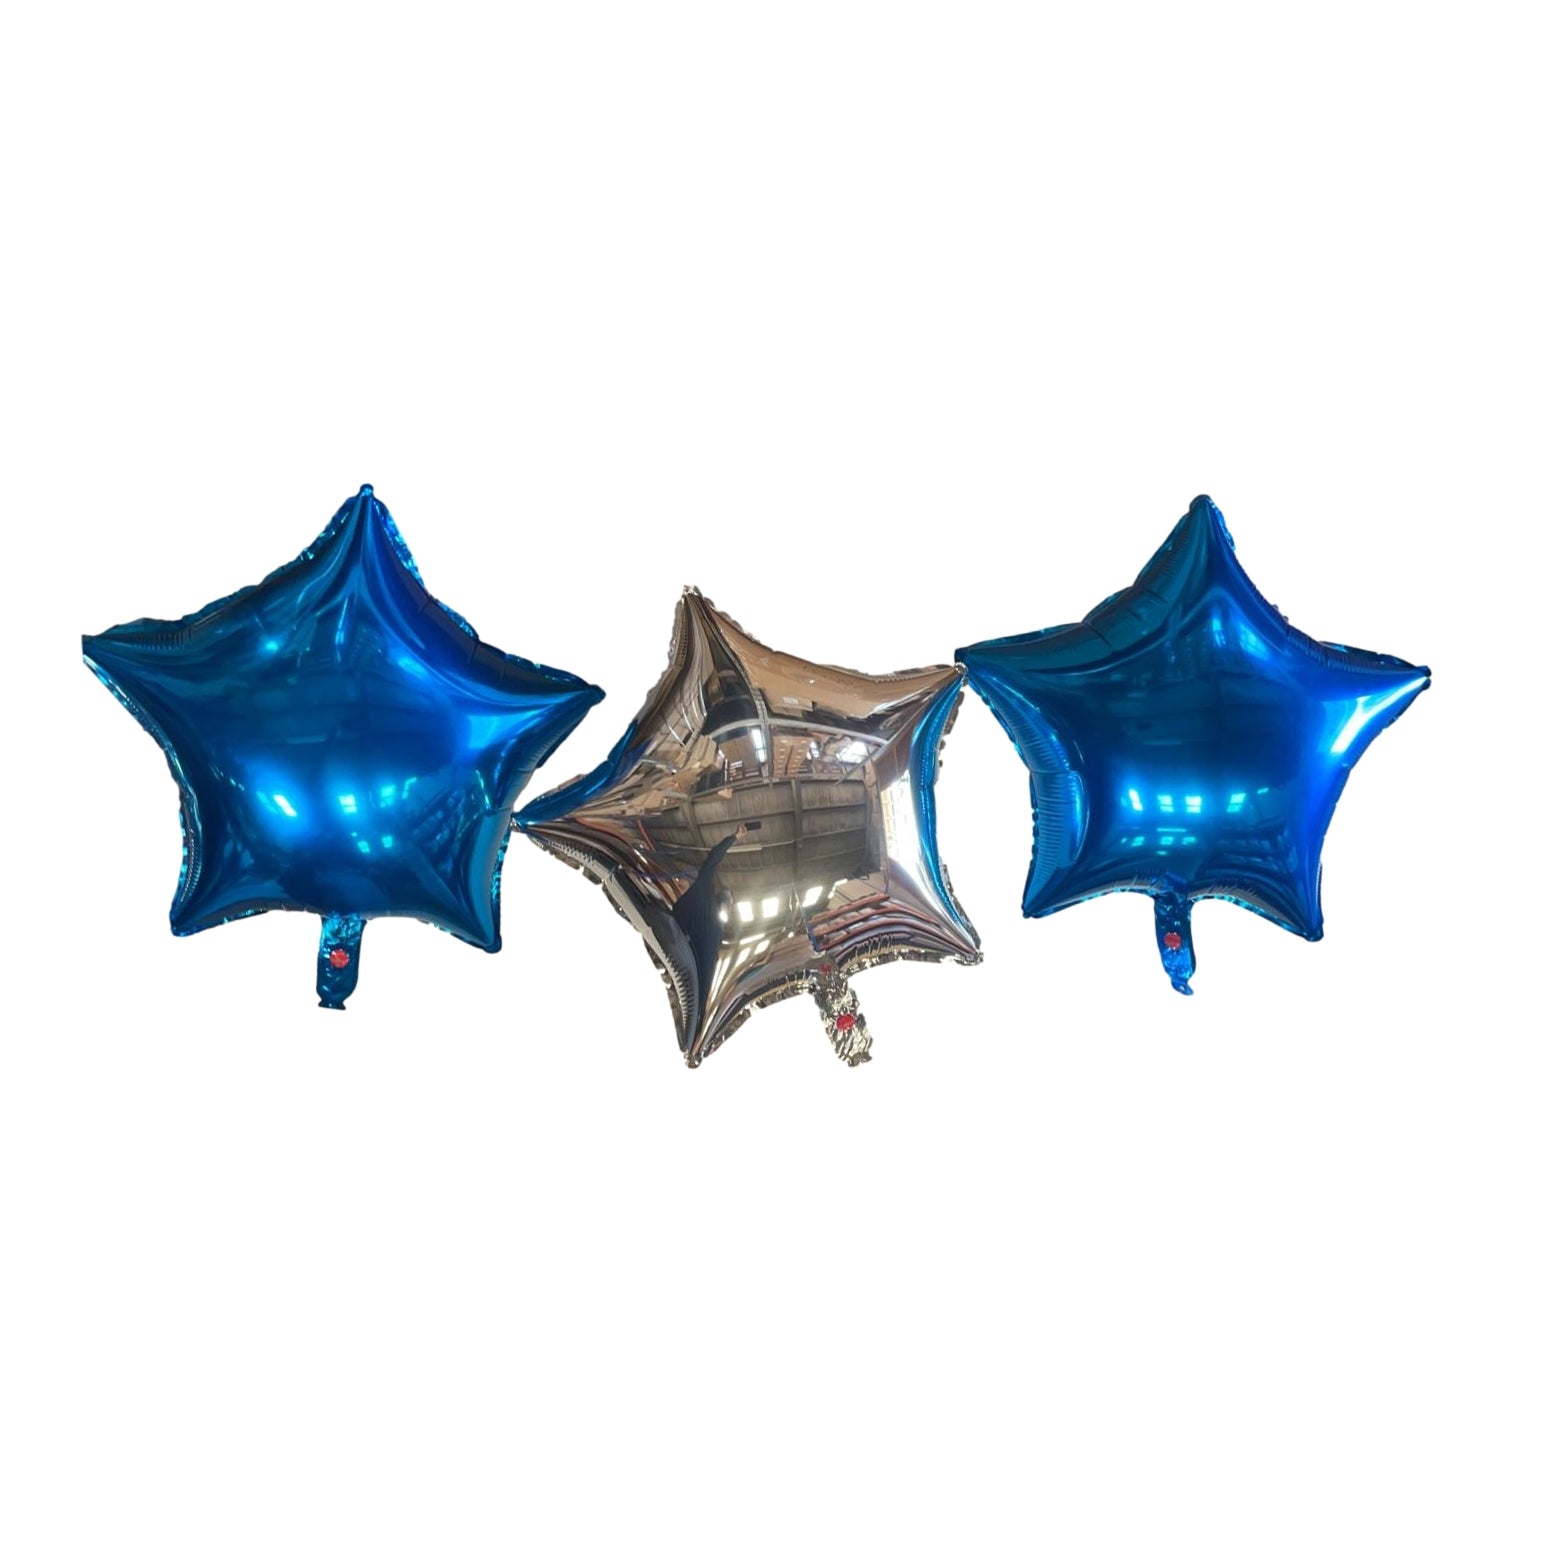 Two Blue and a Silver Star Foil Balloons With Ribbon and Straw for Inflating